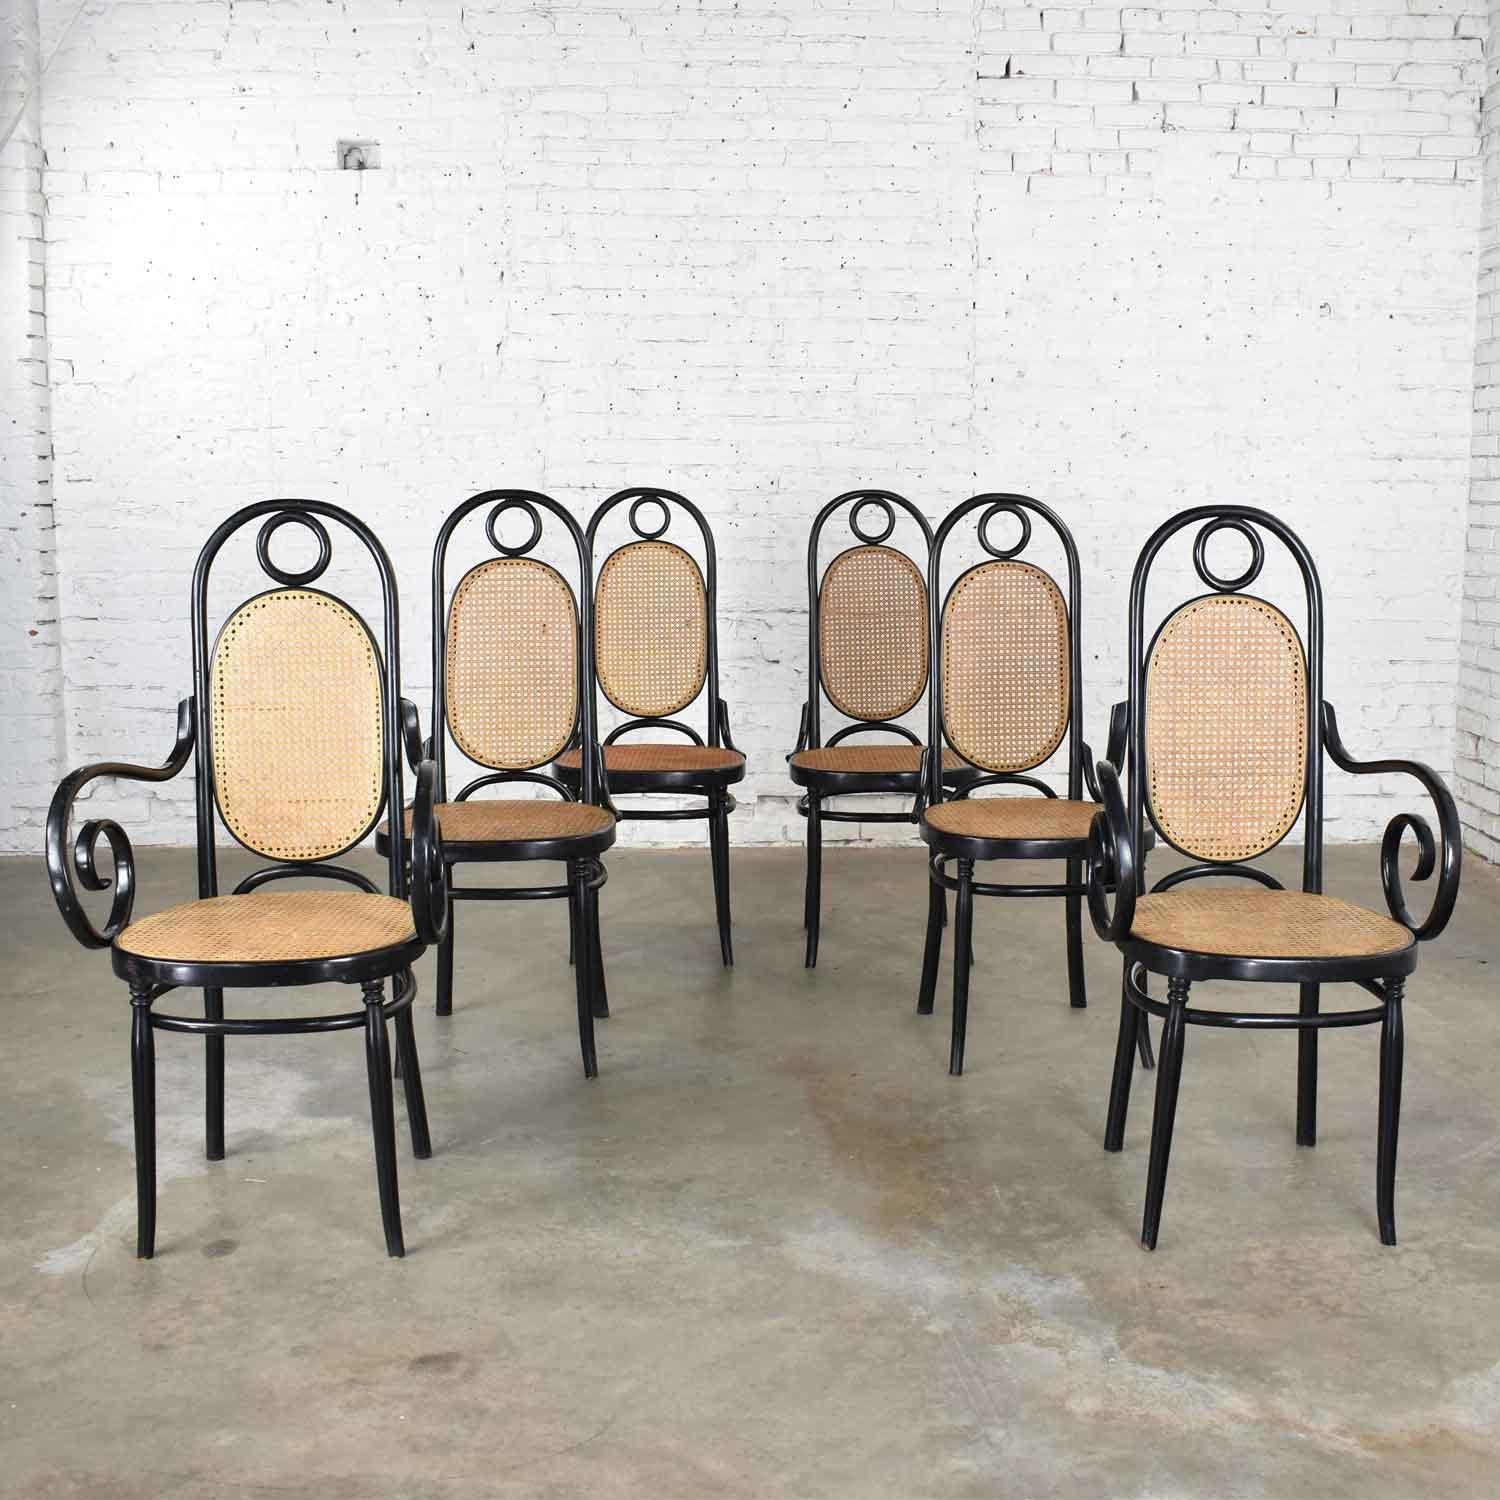 Bauhaus Set Six #17 Thonet Style Black & Natural Tall Bentwood Chairs by Salvatore Leone